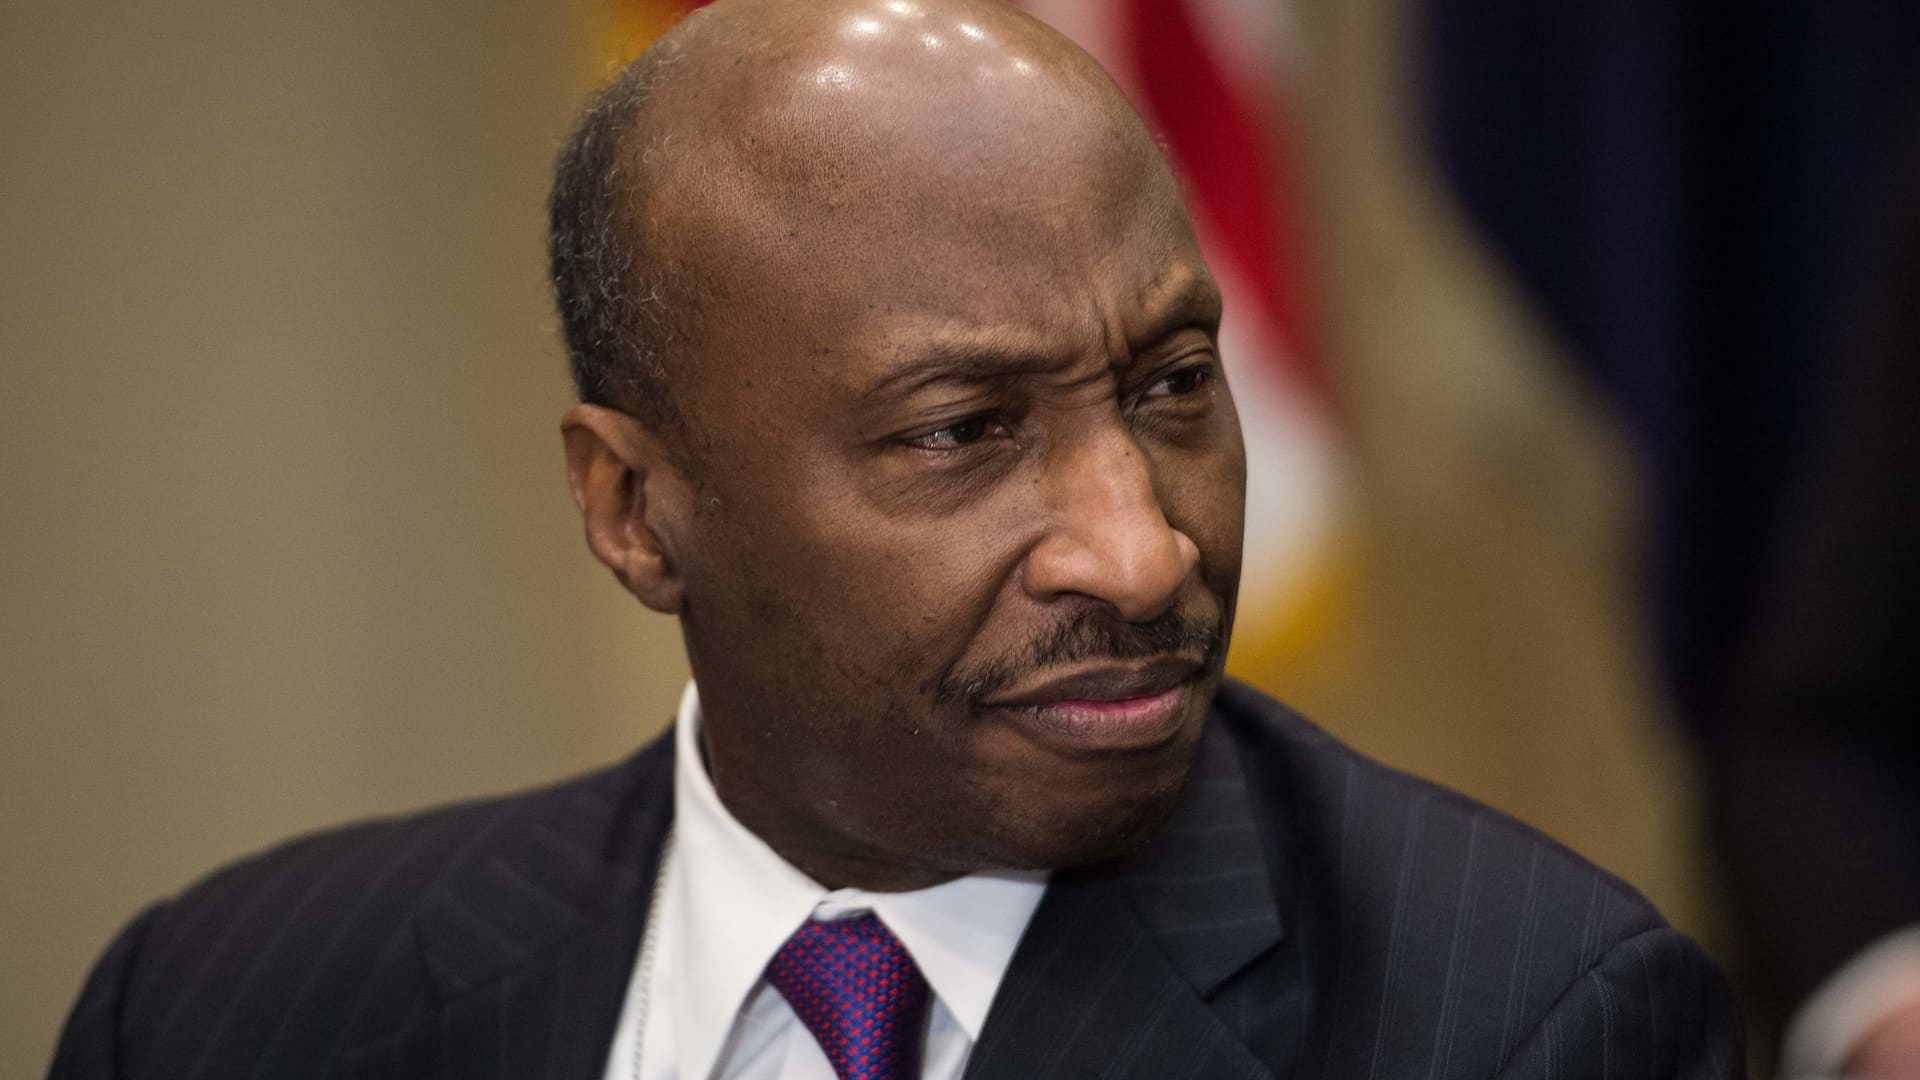 Merck CEO Kenneth Frazier: George Floyd 'could be me'